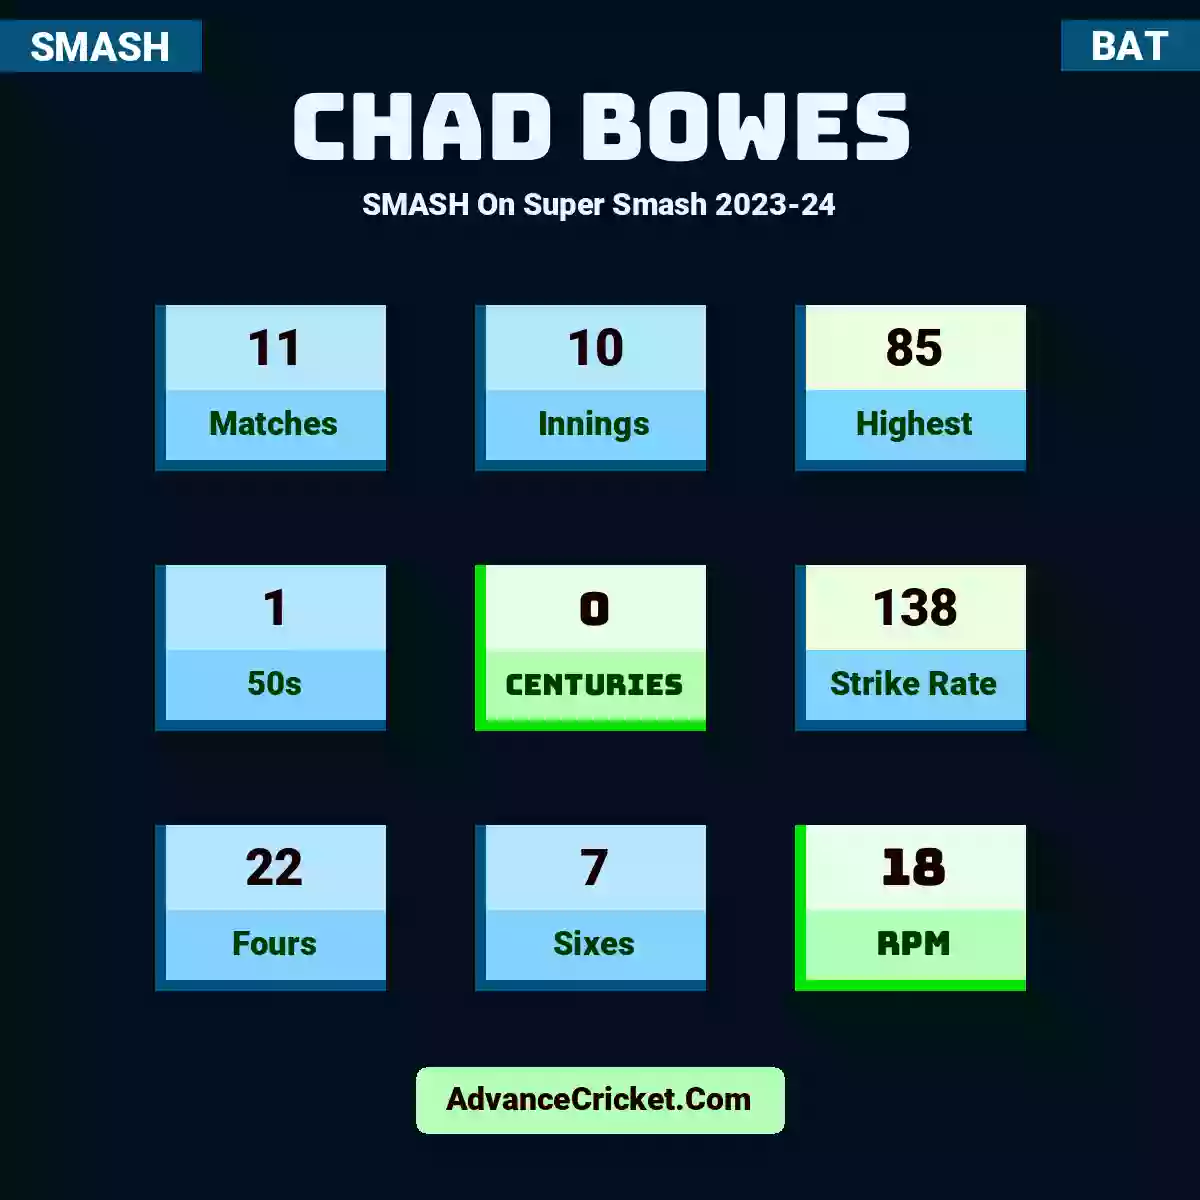 Chad Bowes SMASH  On Super Smash 2023-24, Chad Bowes played 11 matches, scored 85 runs as highest, 1 half-centuries, and 0 centuries, with a strike rate of 138. C.Bowes hit 22 fours and 7 sixes, with an RPM of 18.